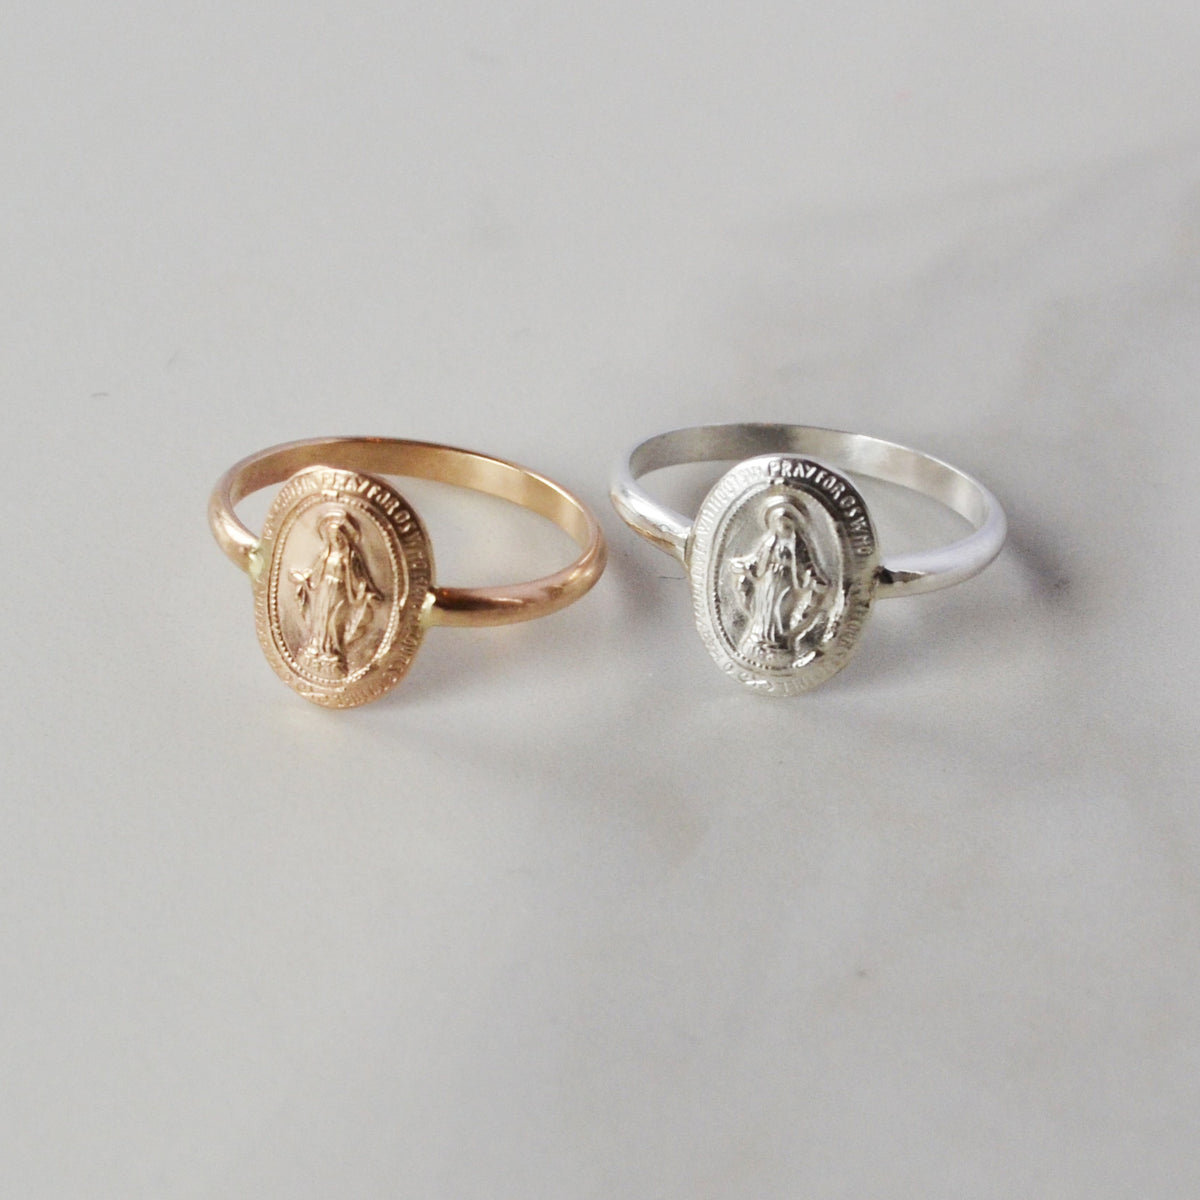 Small Virgin Mary Ring, Gold or Silver